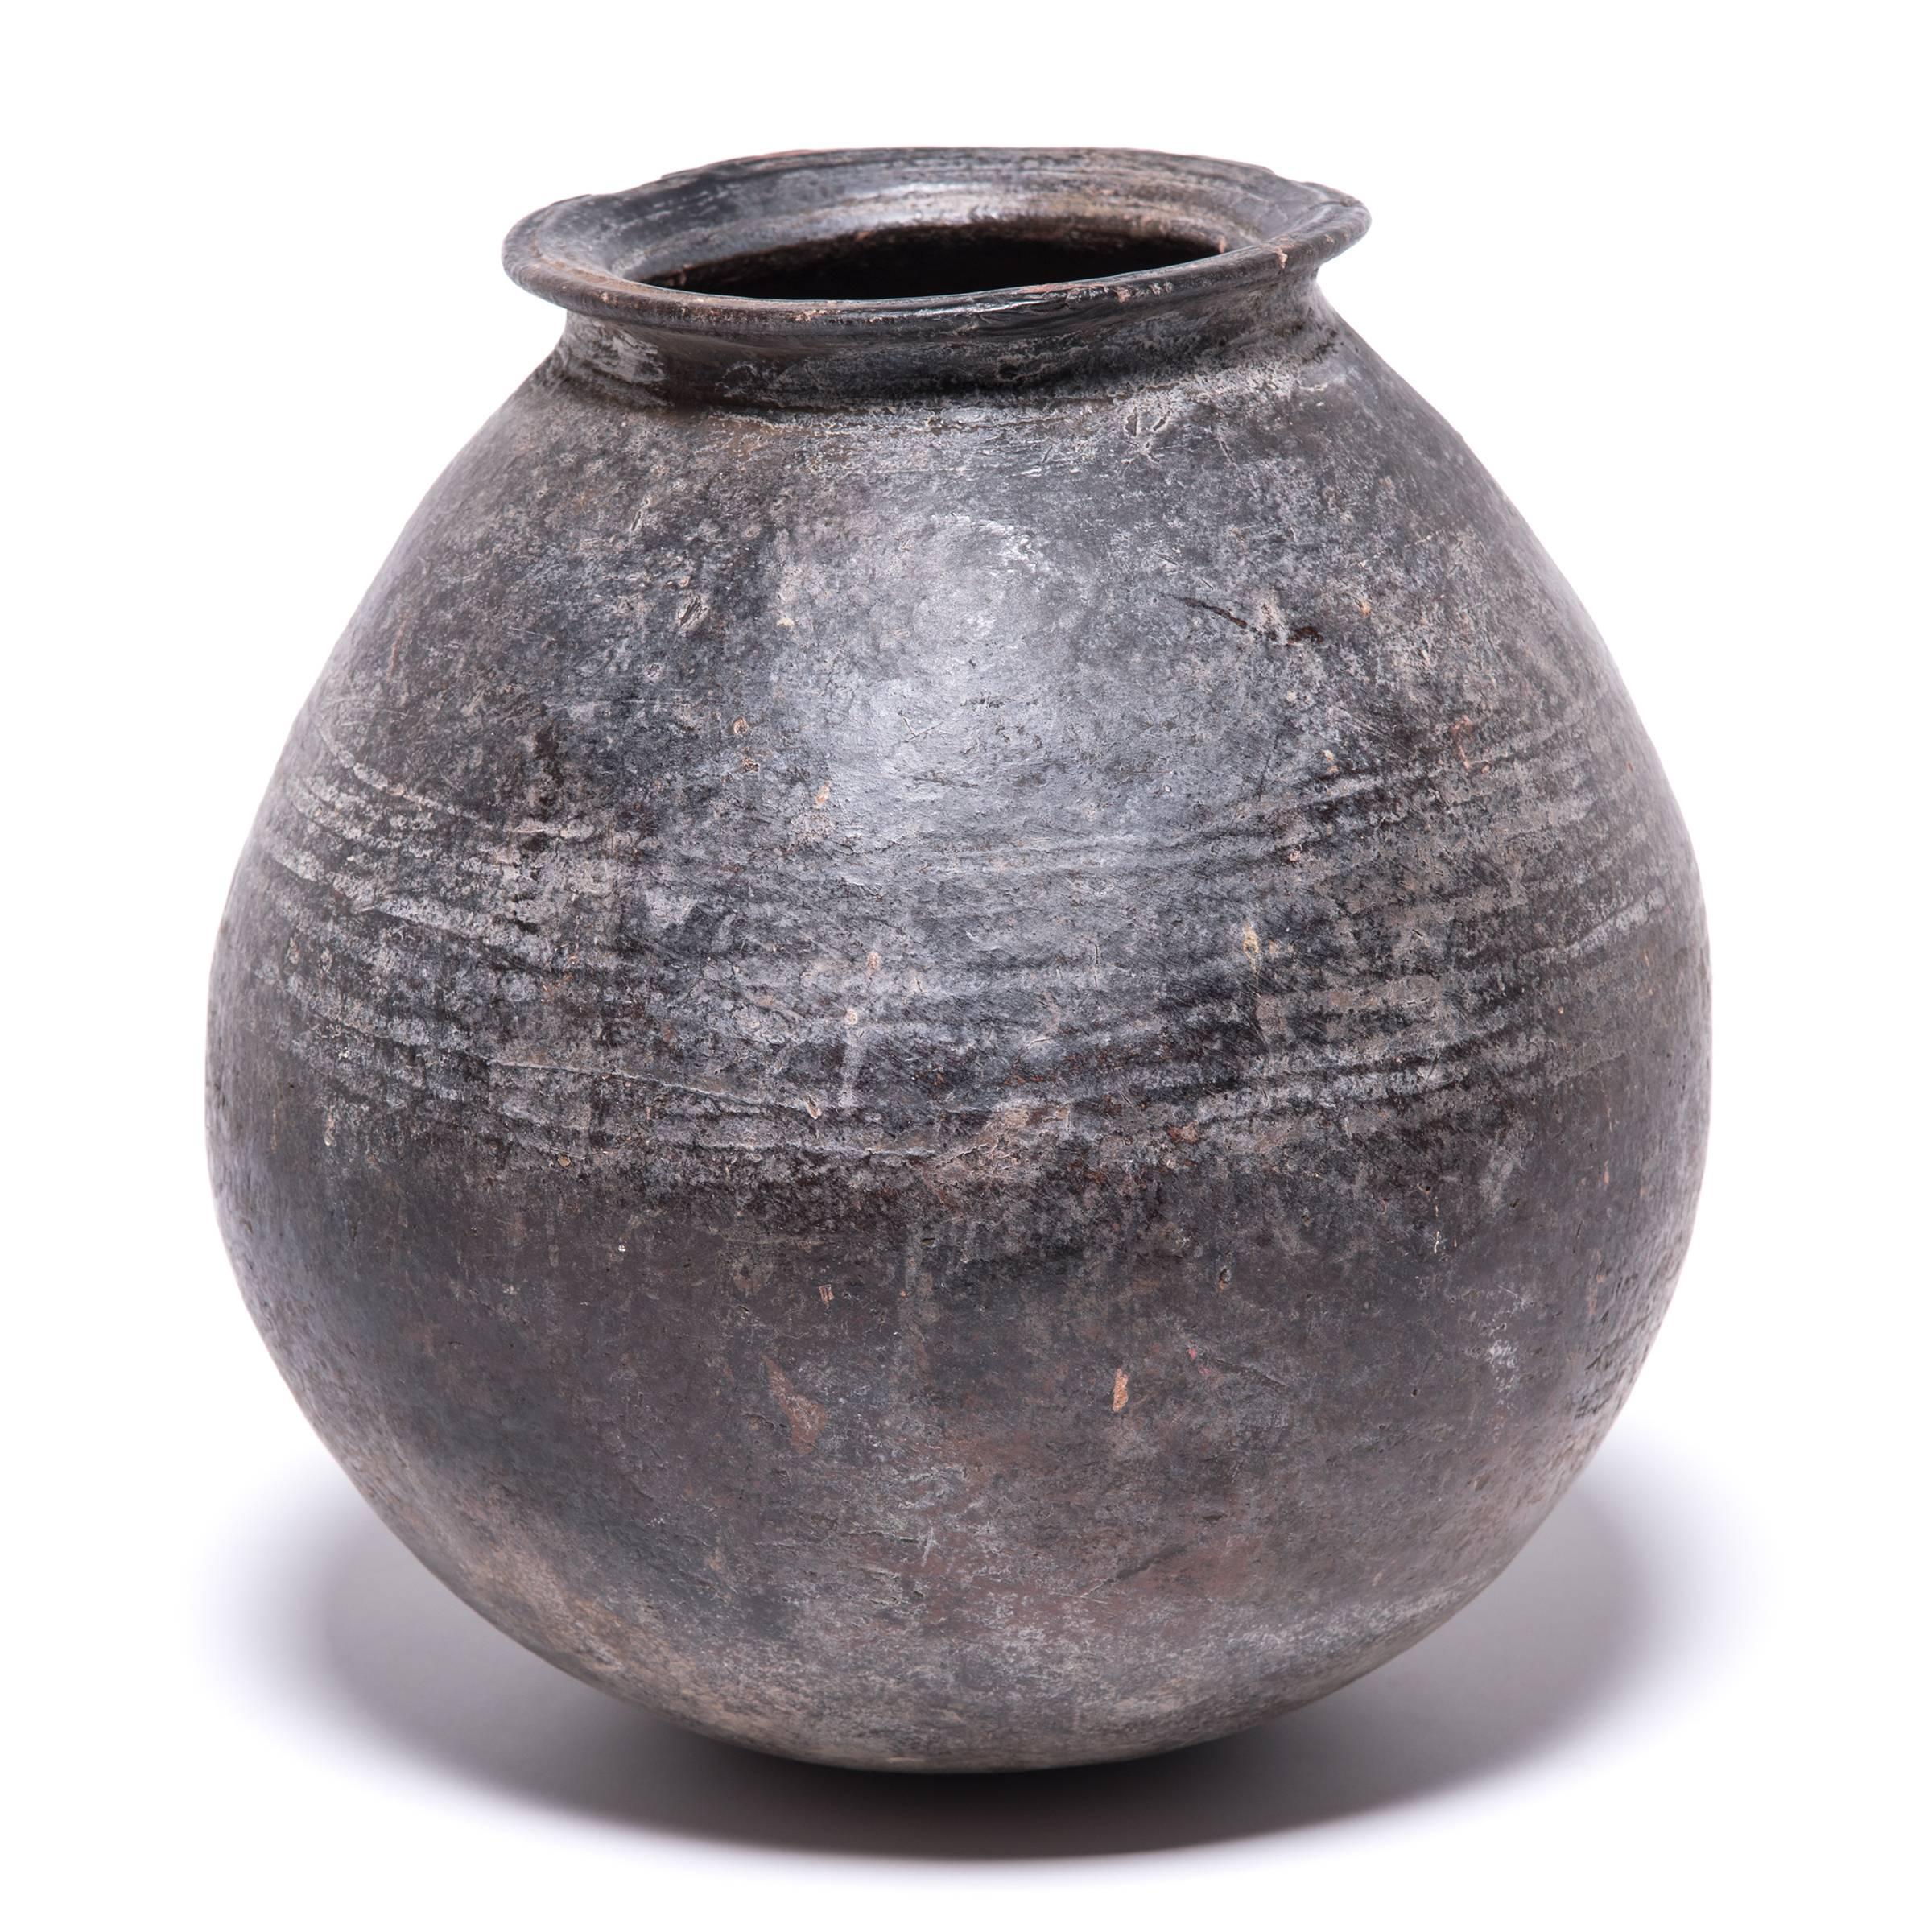 The Nupe people of Nigeria were touted as some of the finest ceramicists in Africa. The form and glaze of the vessel's lip marks it as an early example of their craft. Everyday objects, like this water vessel, received detailed attention. The